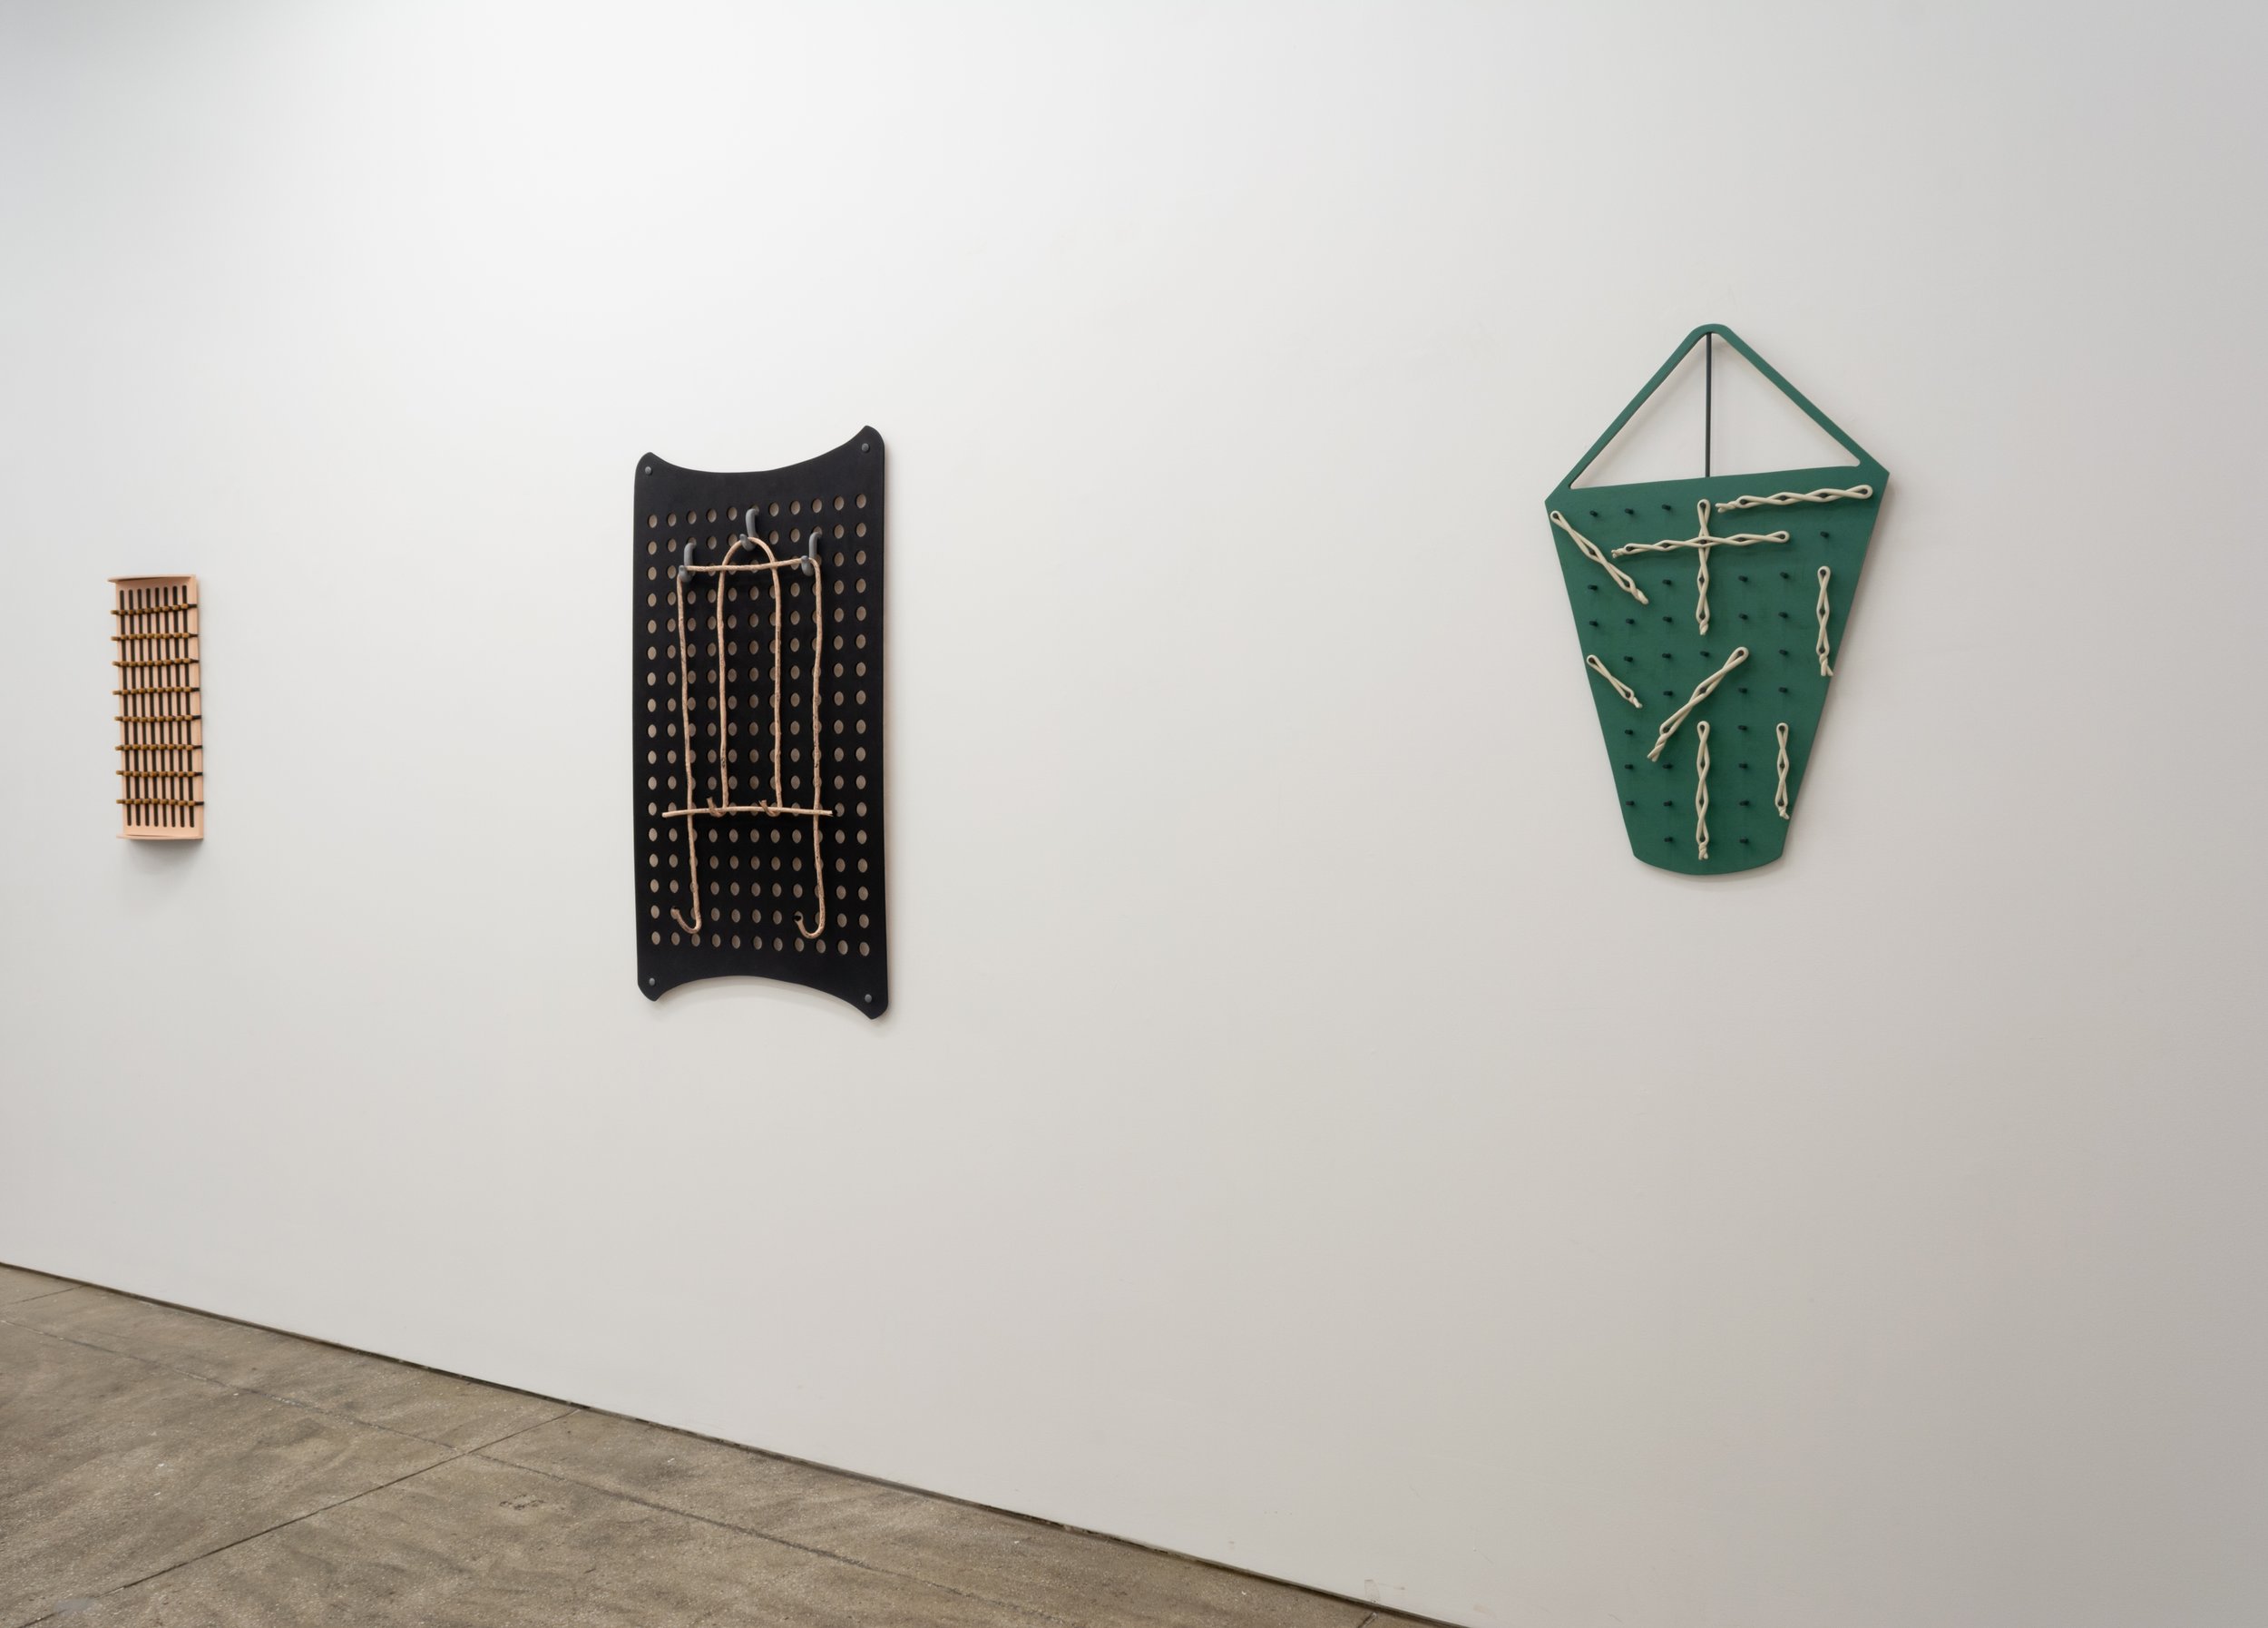 Installation view of "Pastimes", solo exhibition at Morgan Lehman Gallery, New York, March 2,–April 8, 2023